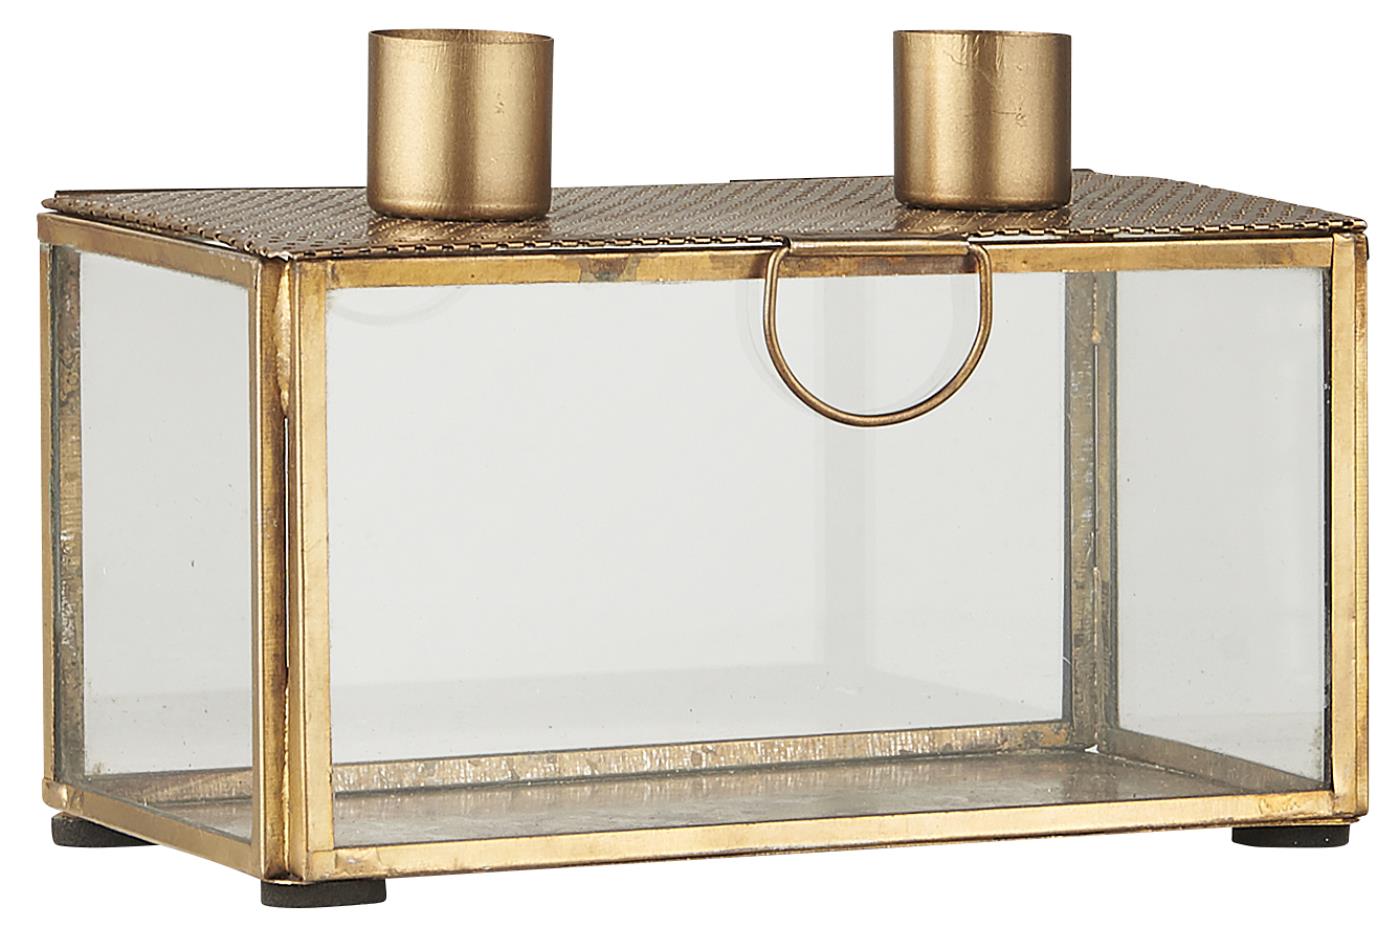 Double Candle Holder- Glass box with pierced metal lid - Antique Gold